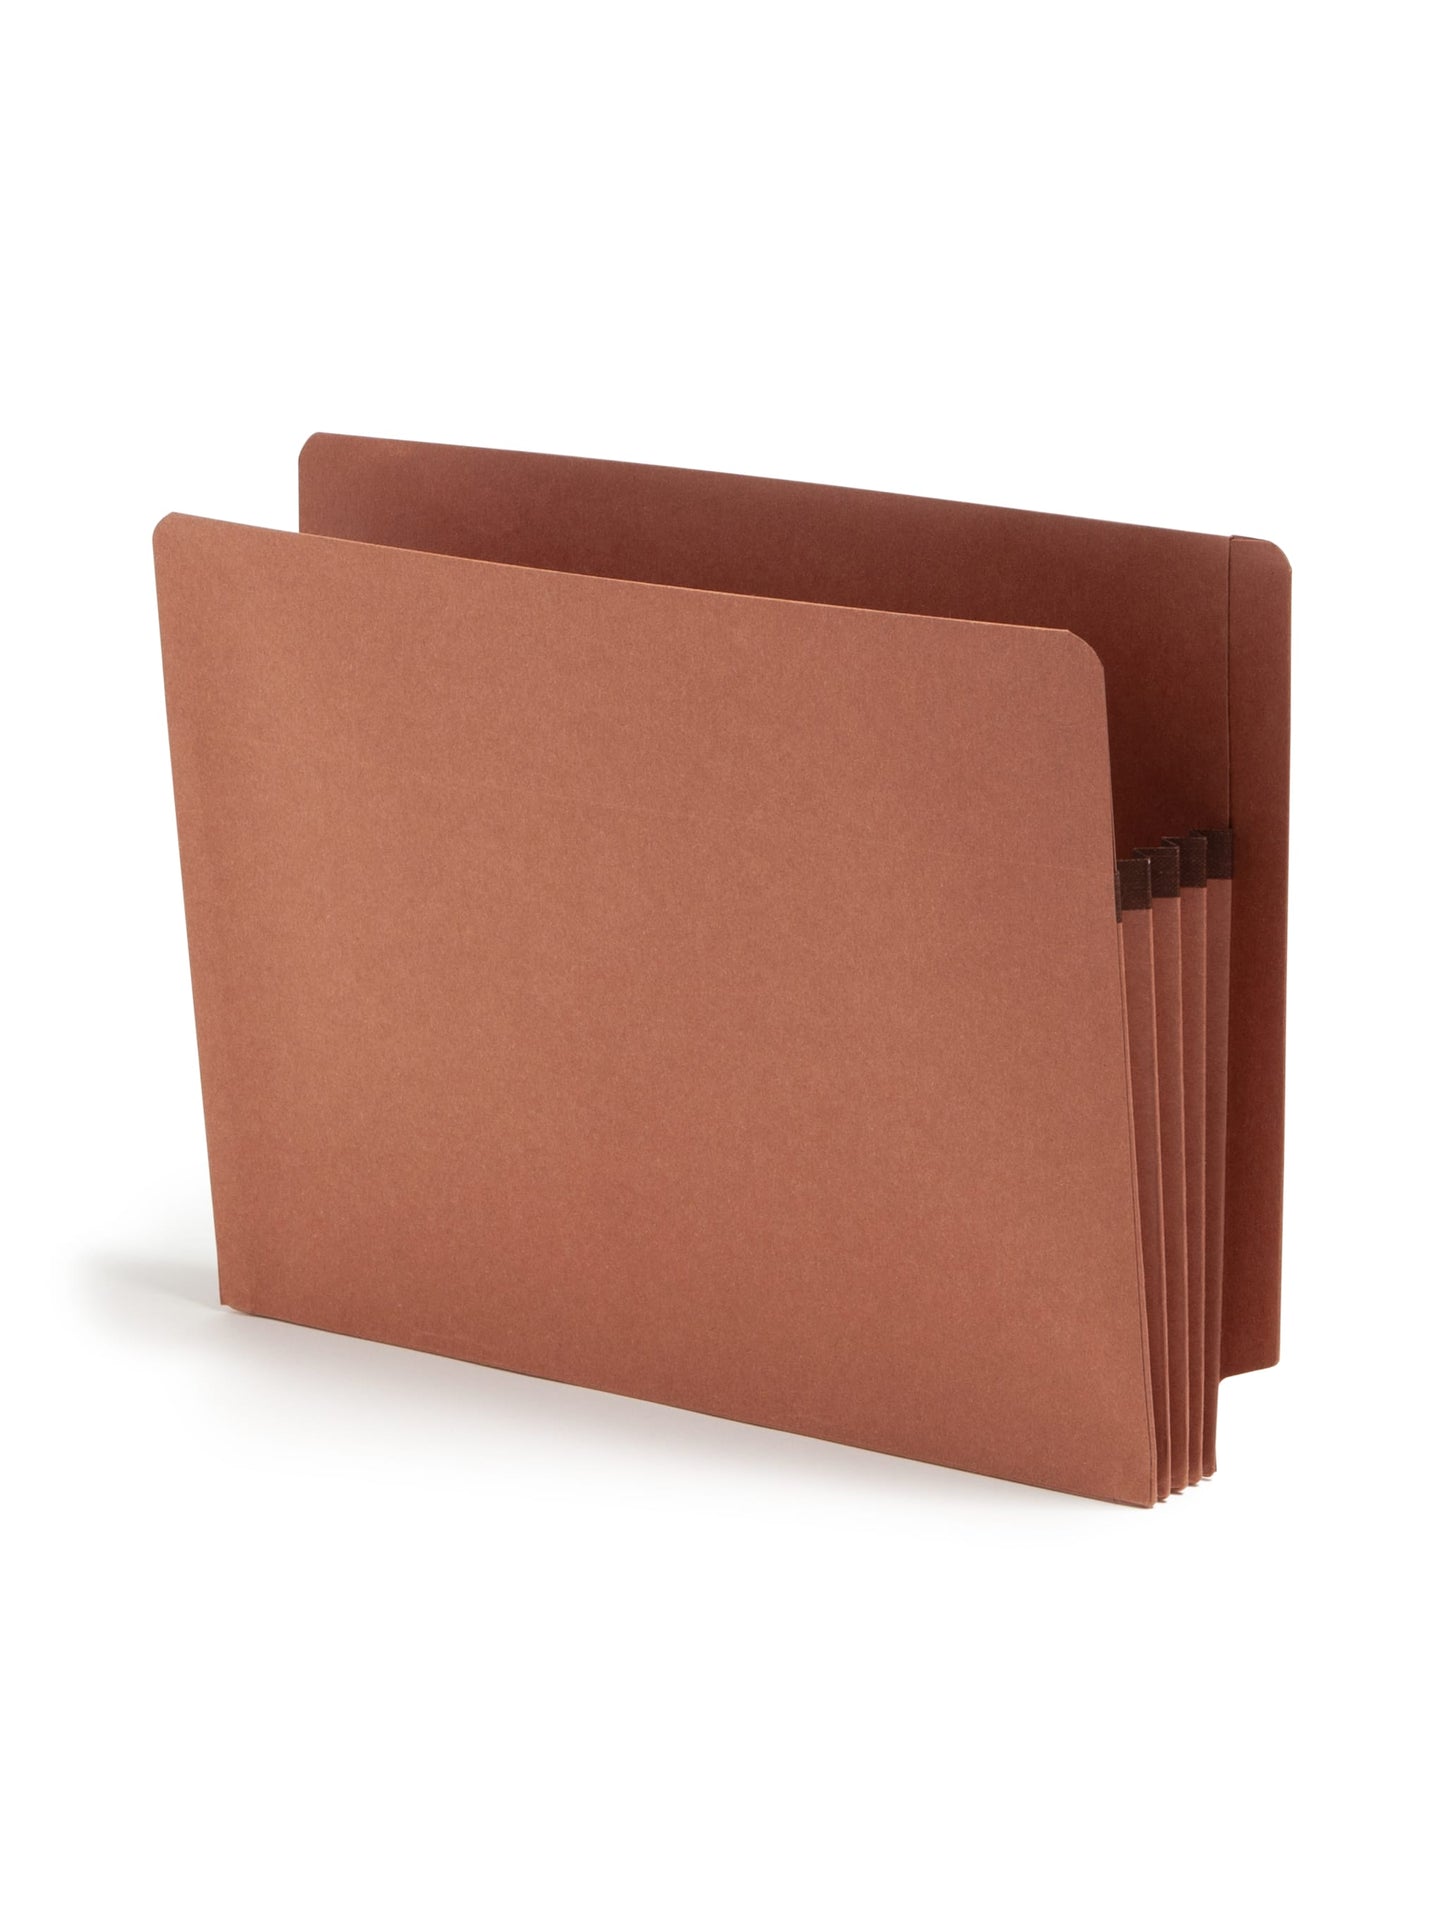 Etra-Wide End Tab File Pockets, Straight-Cut Tab, 3-1/2 inch Expansion, Redrope Color, Extra Wide Letter Size, Set of 0, 30086486736108